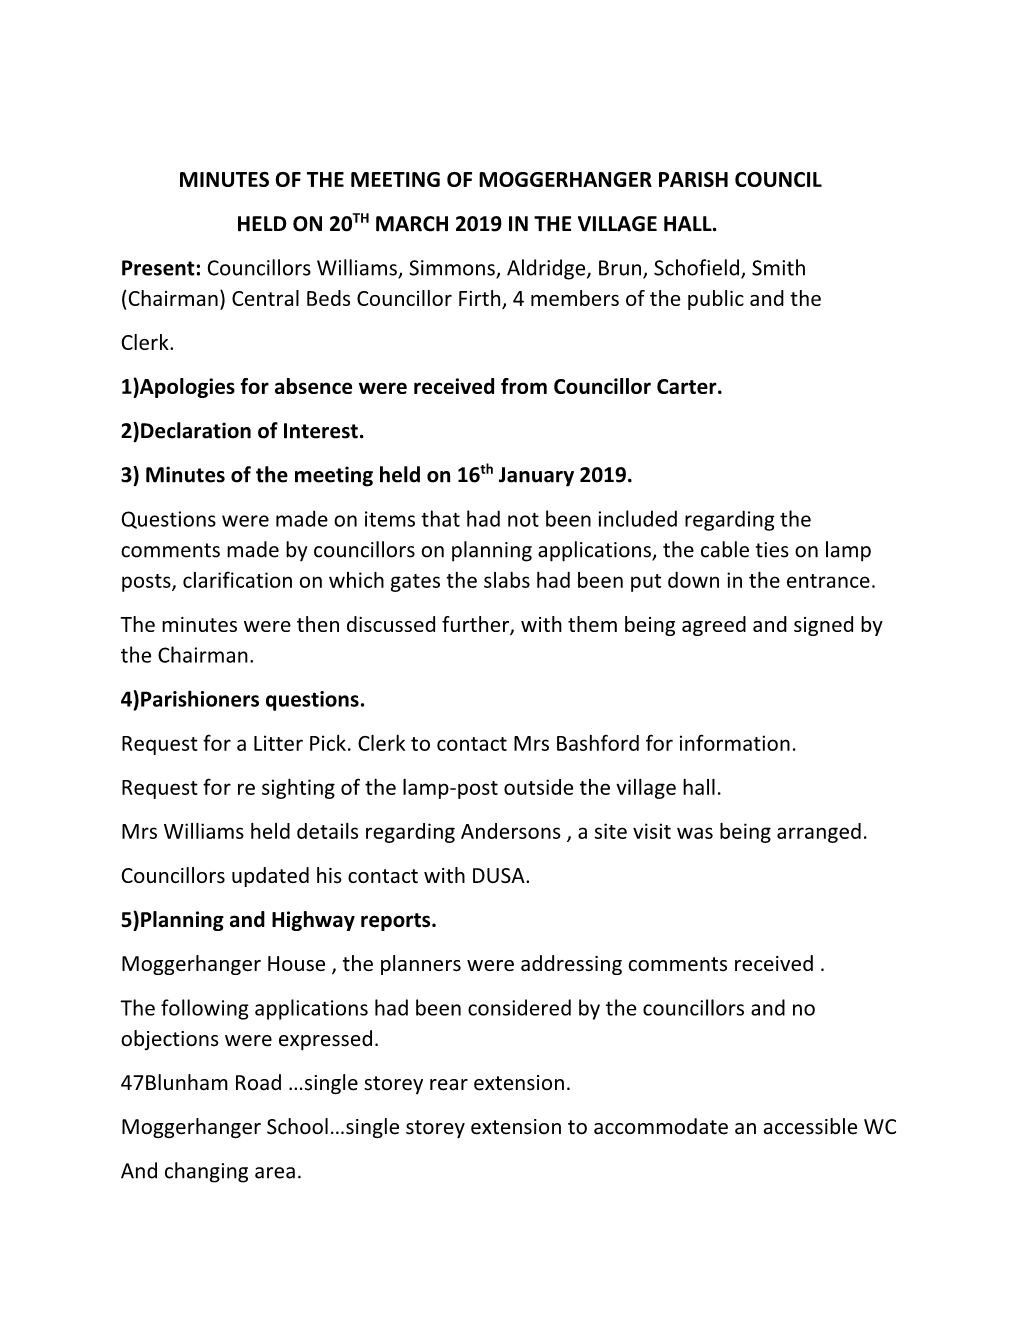 Minutes of the Meeting of Moggerhanger Parish Council Held on 20Th March 2019 in the Village Hall